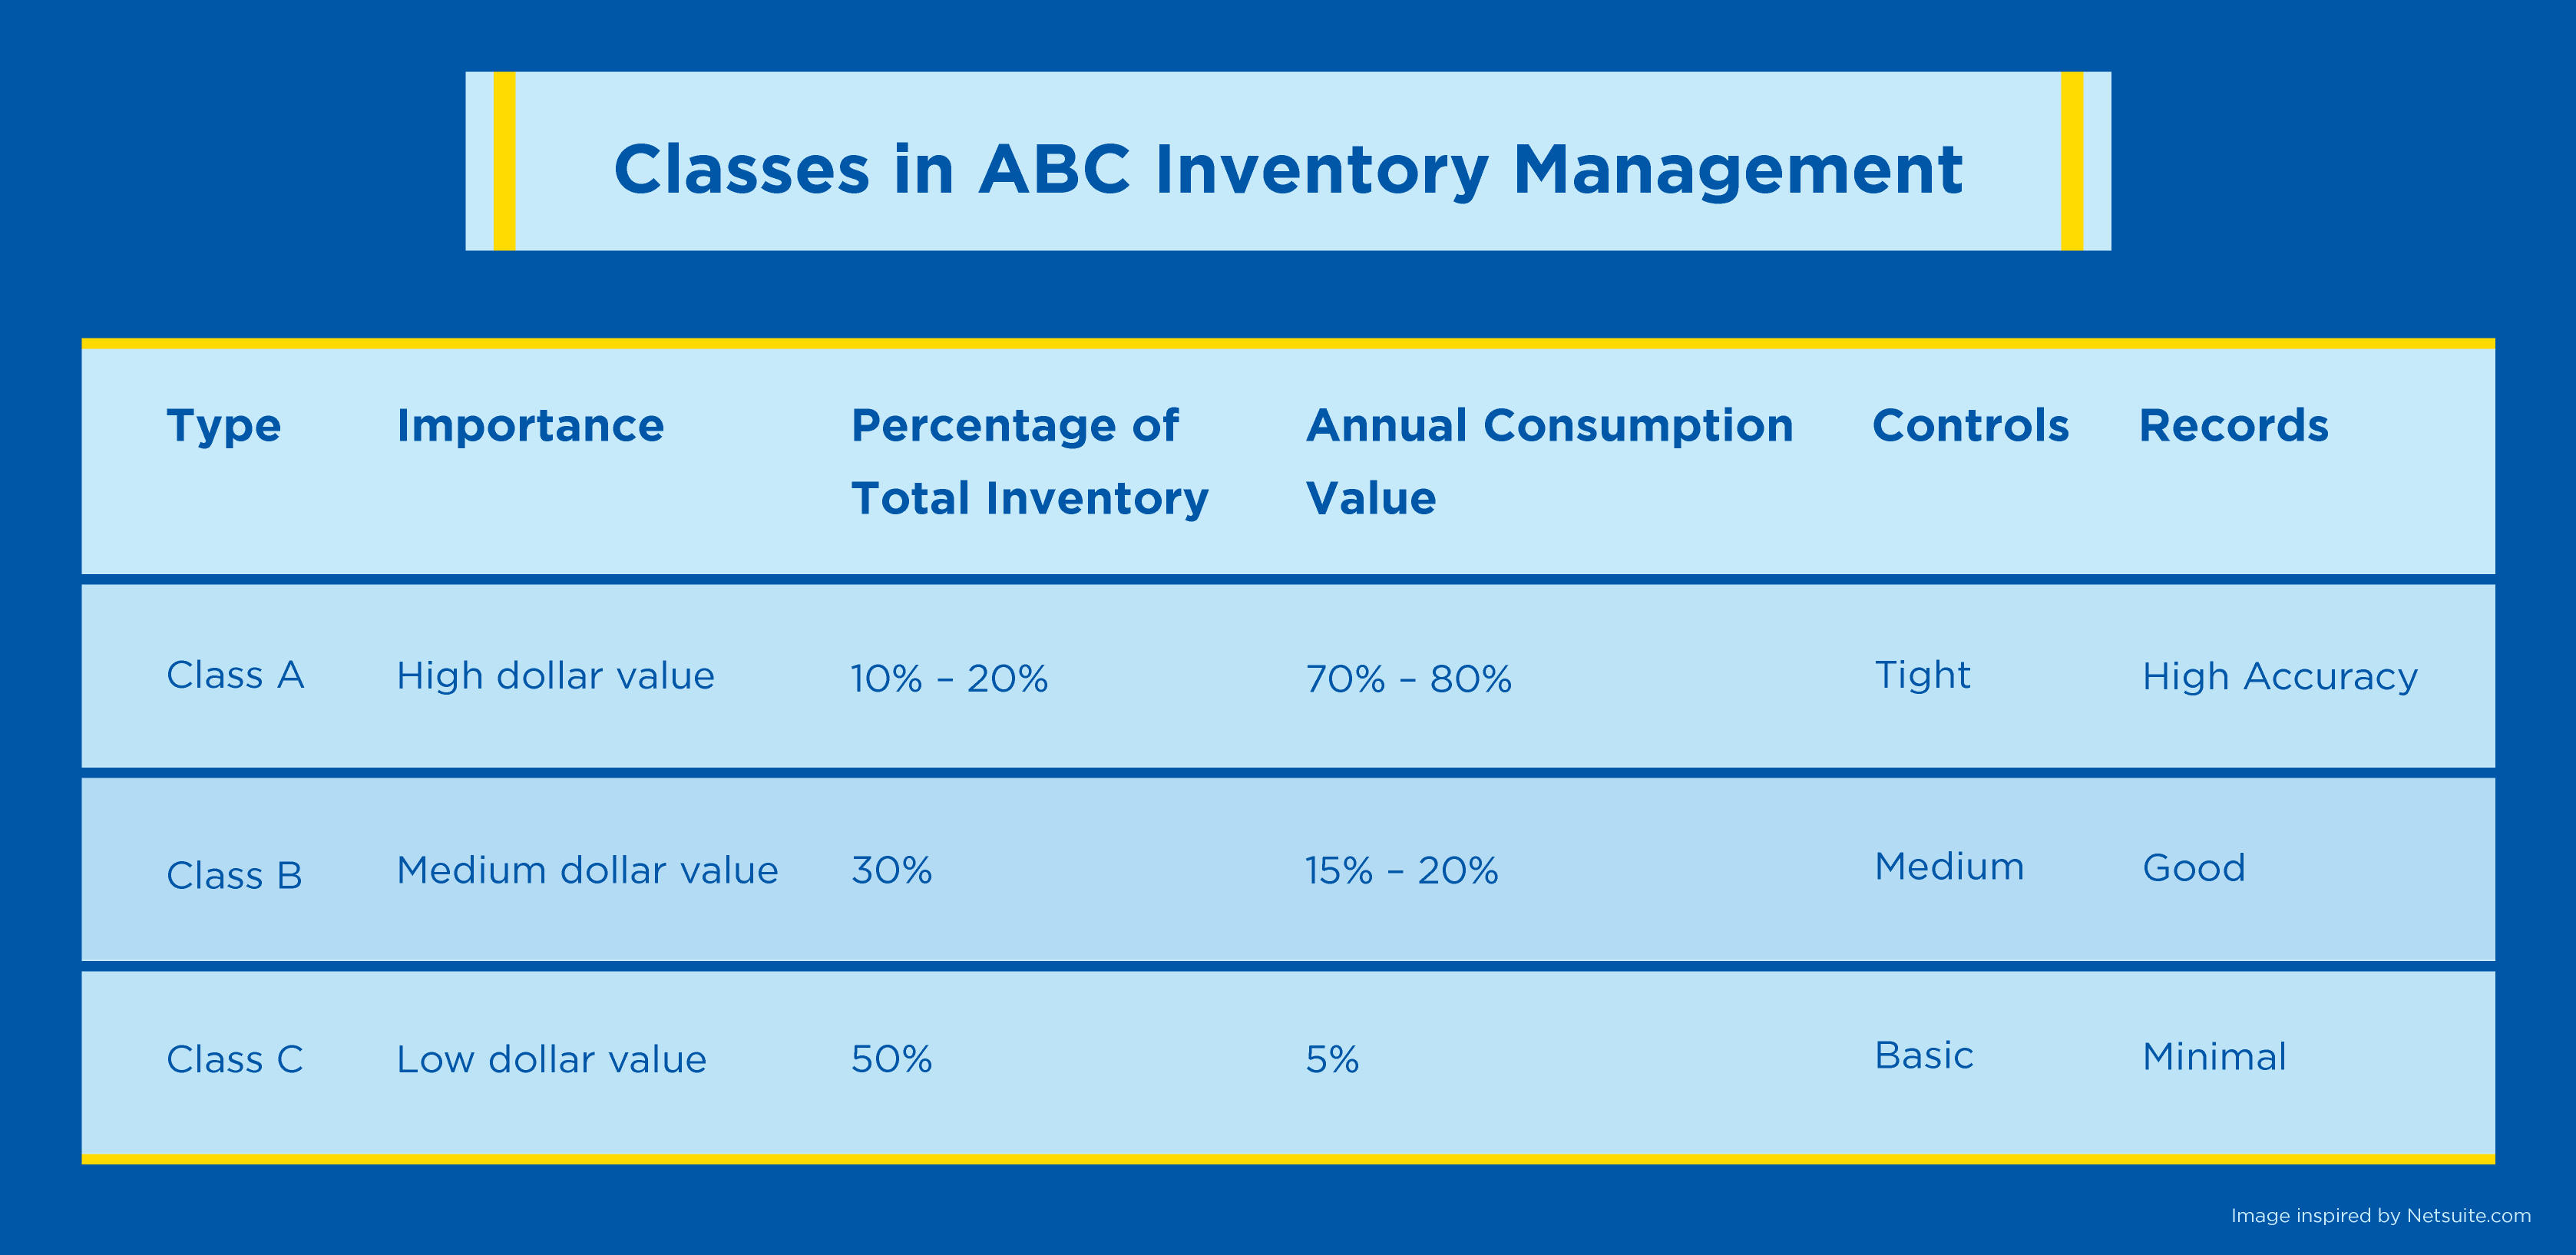 Classes-in-ABC-Inventory-Management-